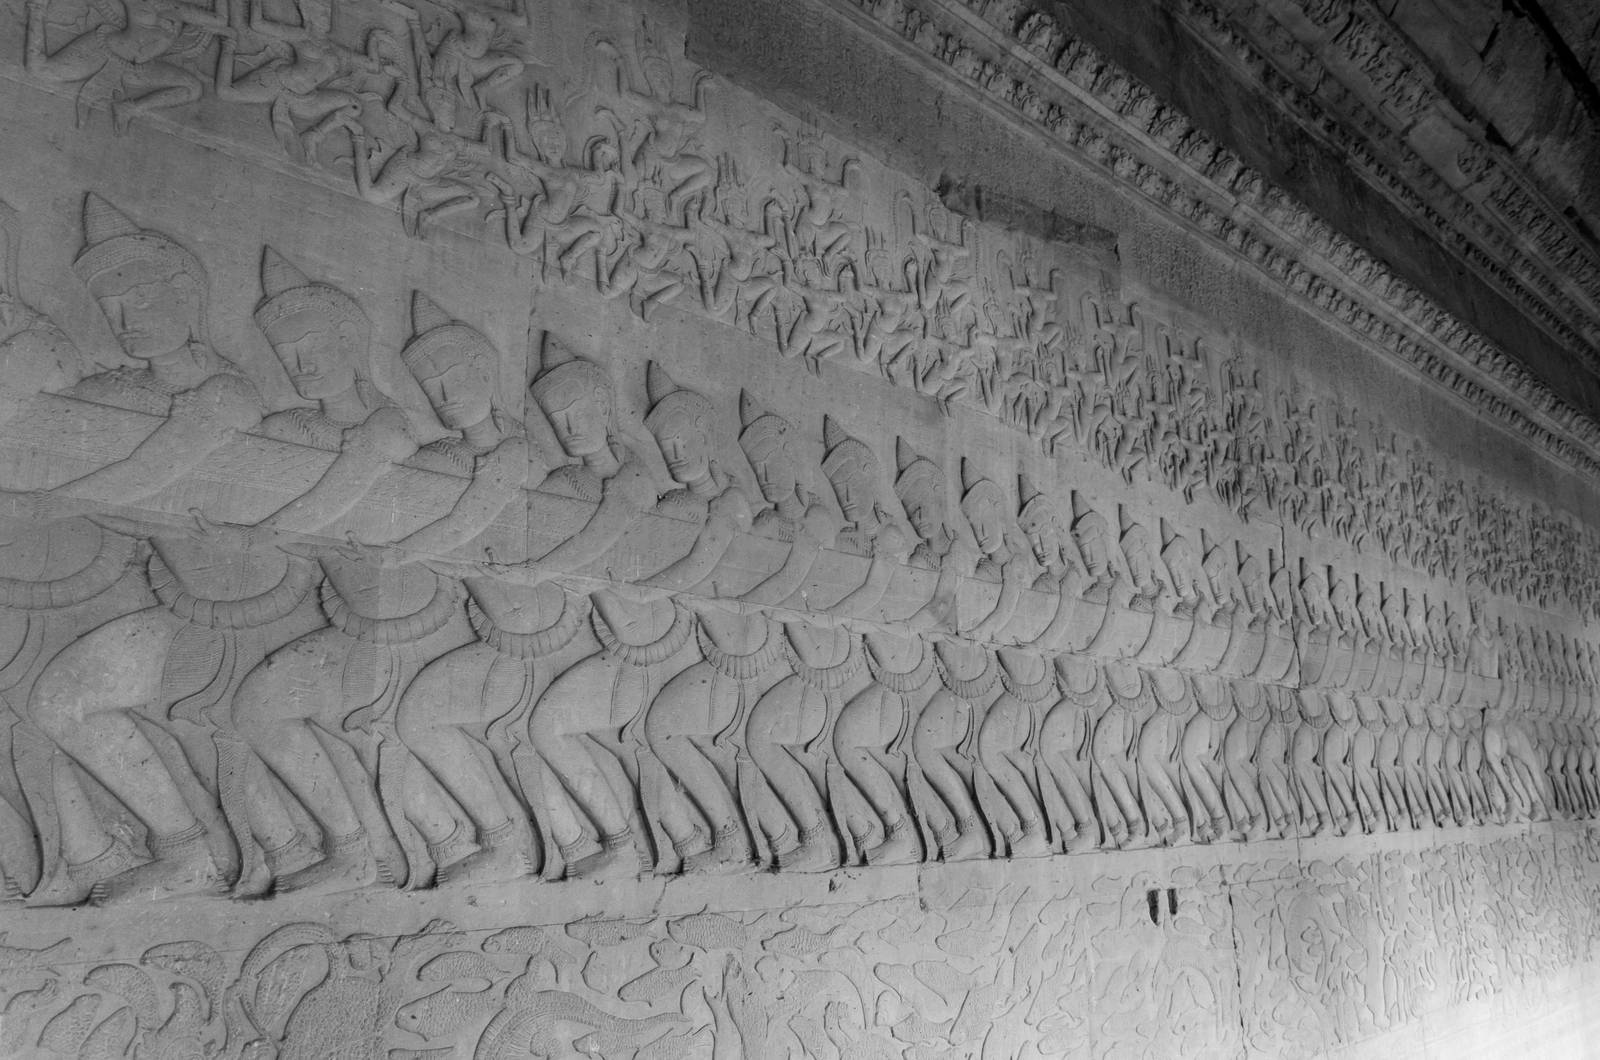 Ancient Khmer bas relief carving showing Hindu gods pulling on the snake Vasuki in the Churning of the Ocean of Milk legend, Angkor Wat Temple, Siem Reap, Cambodia